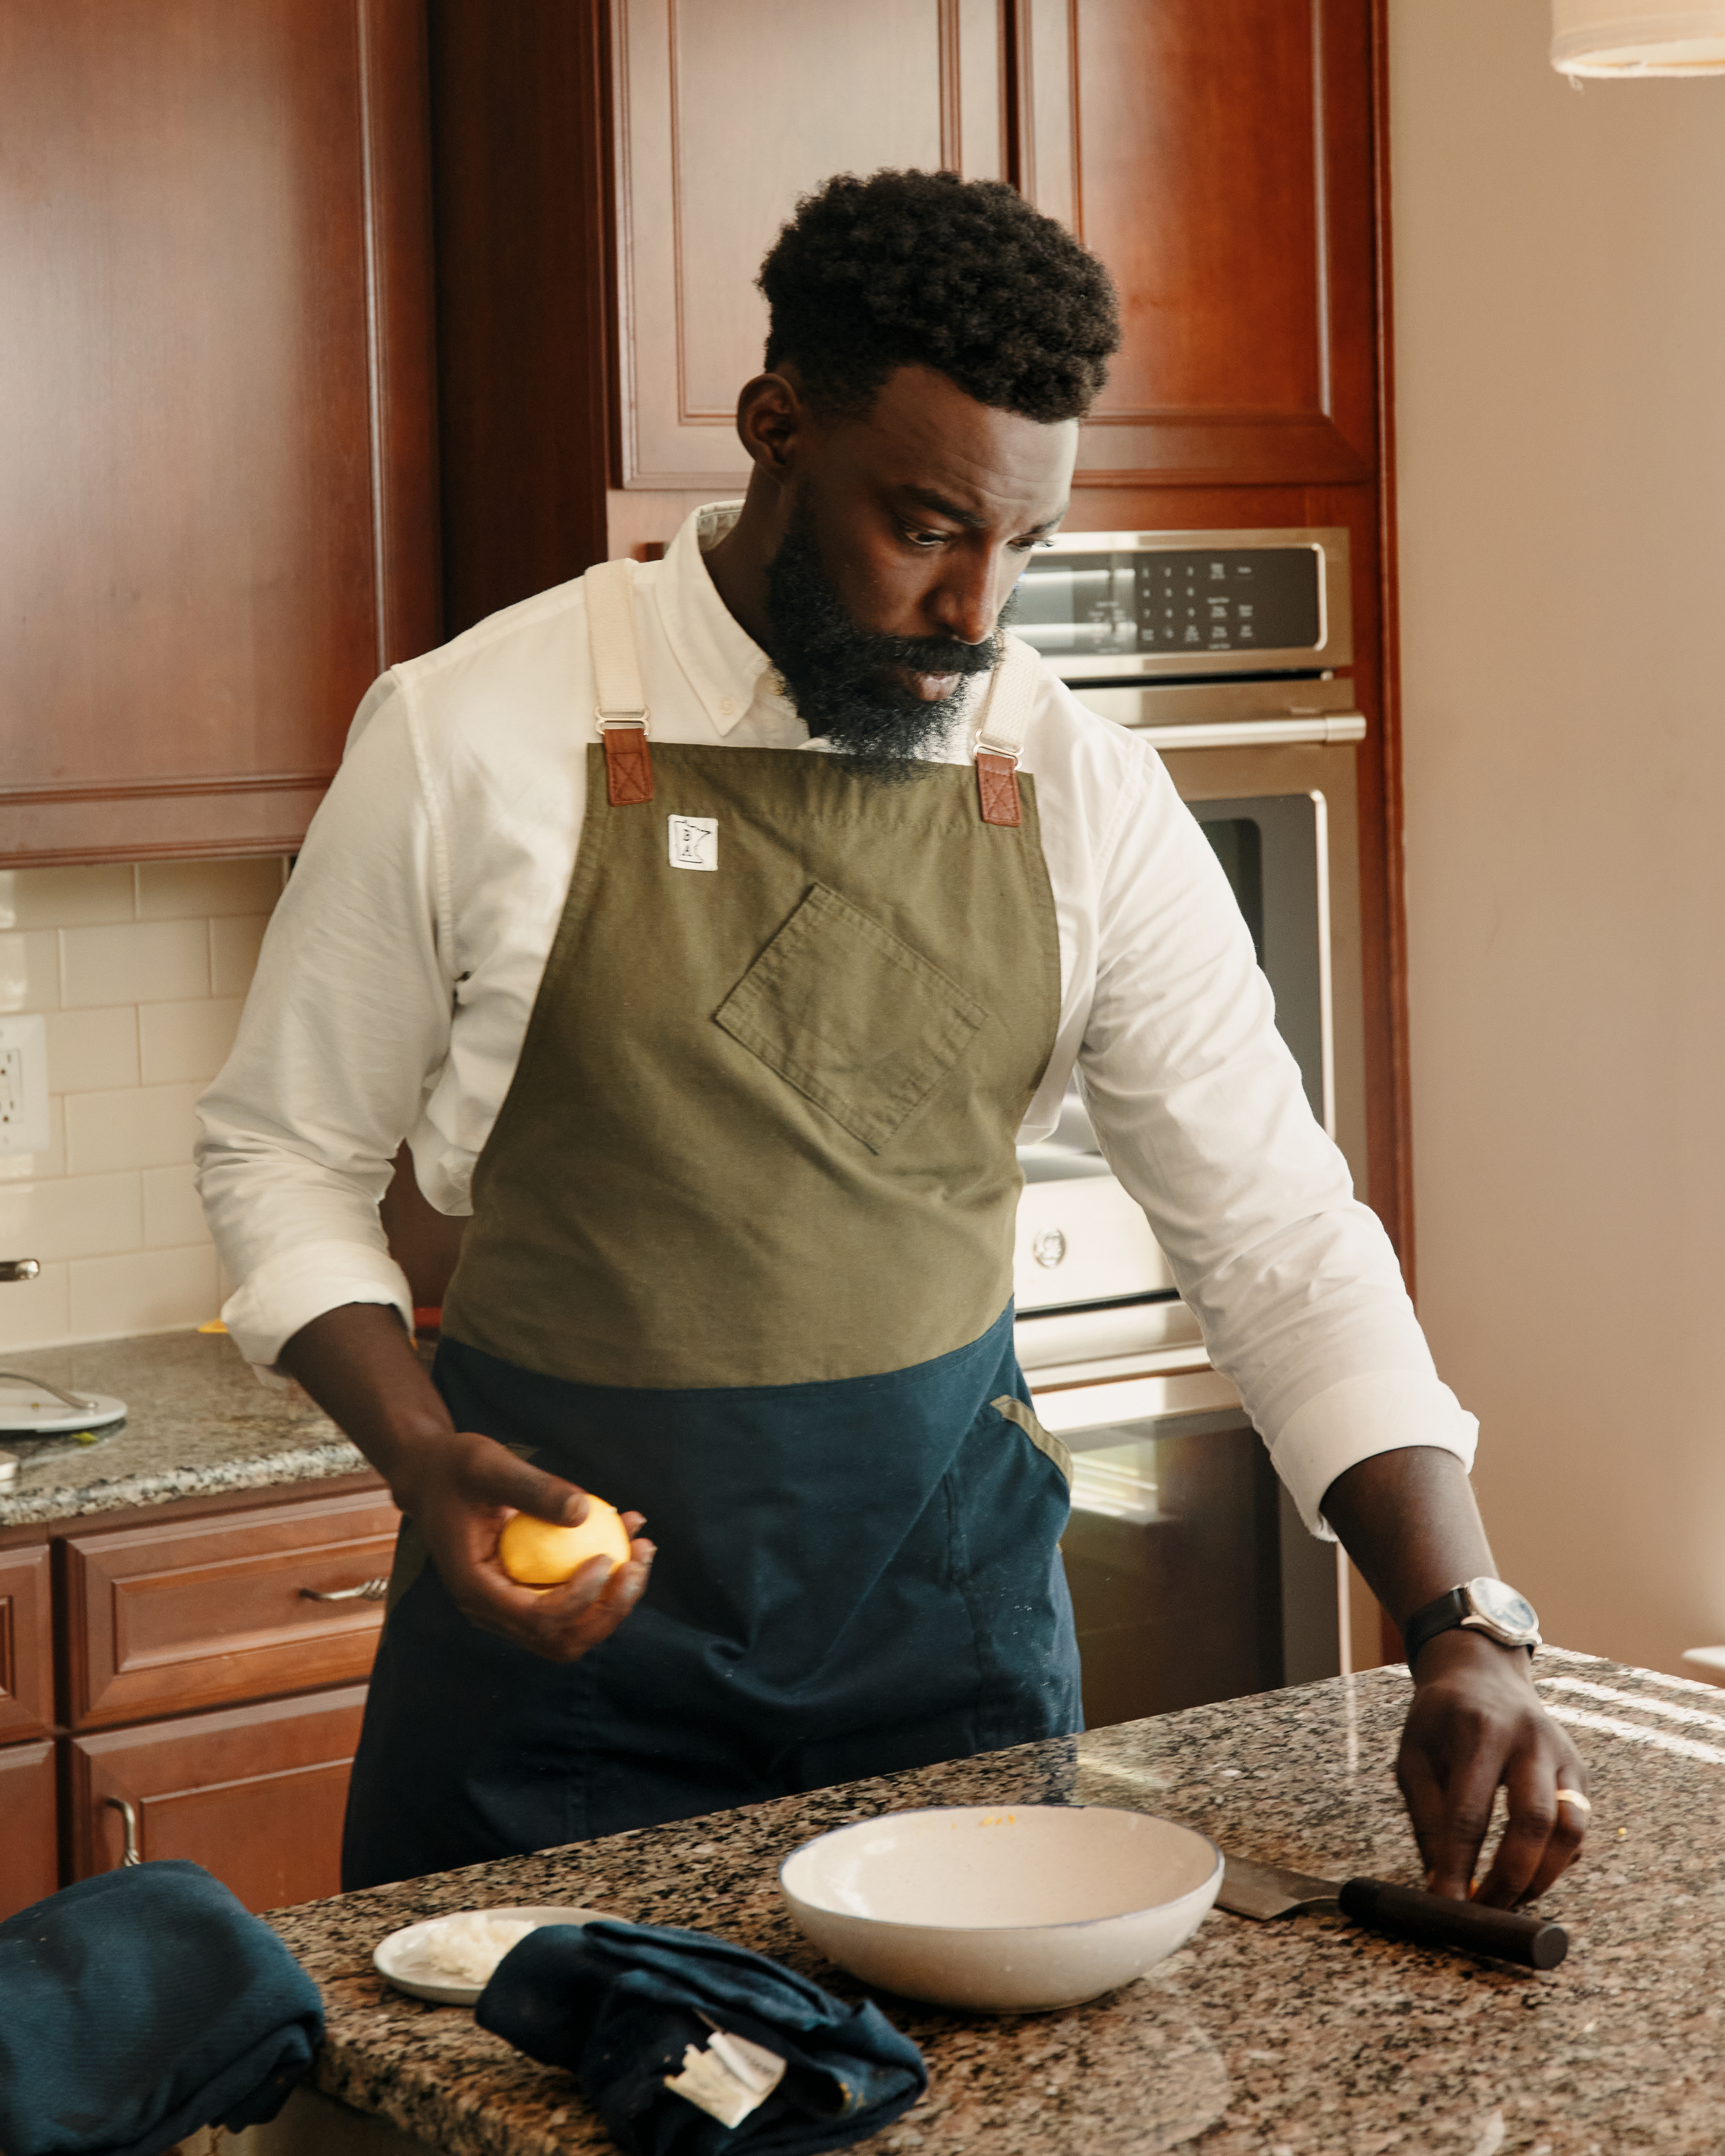 Ghanaian American chef Eric Adjepong is known for incorporating West African cuisine into his dishes.